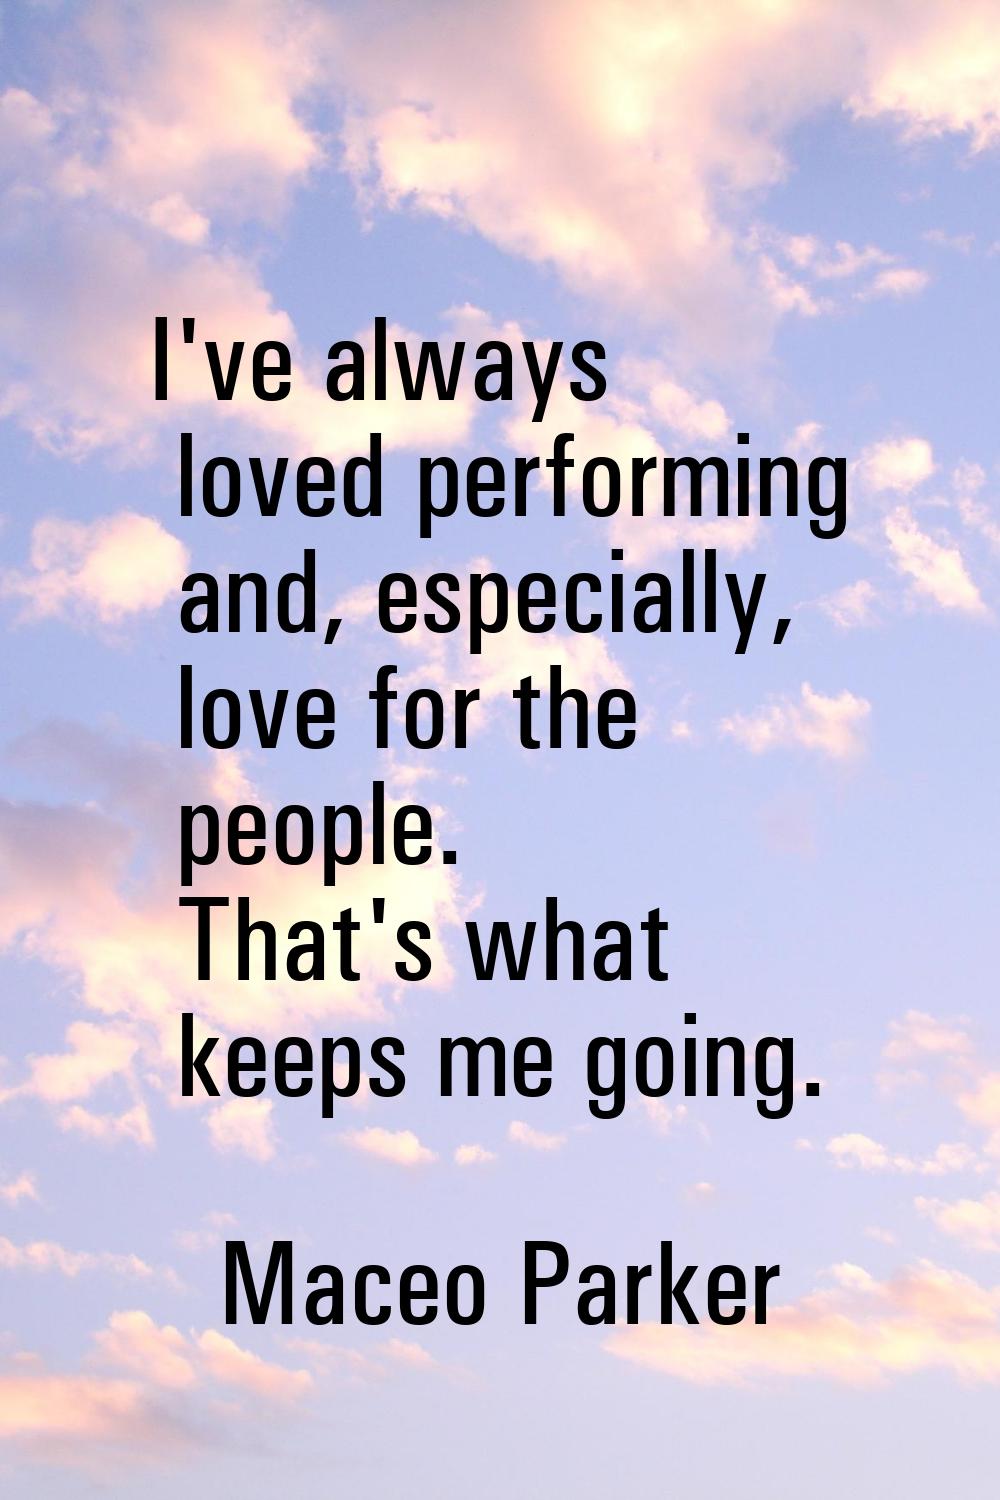 I've always loved performing and, especially, love for the people. That's what keeps me going.